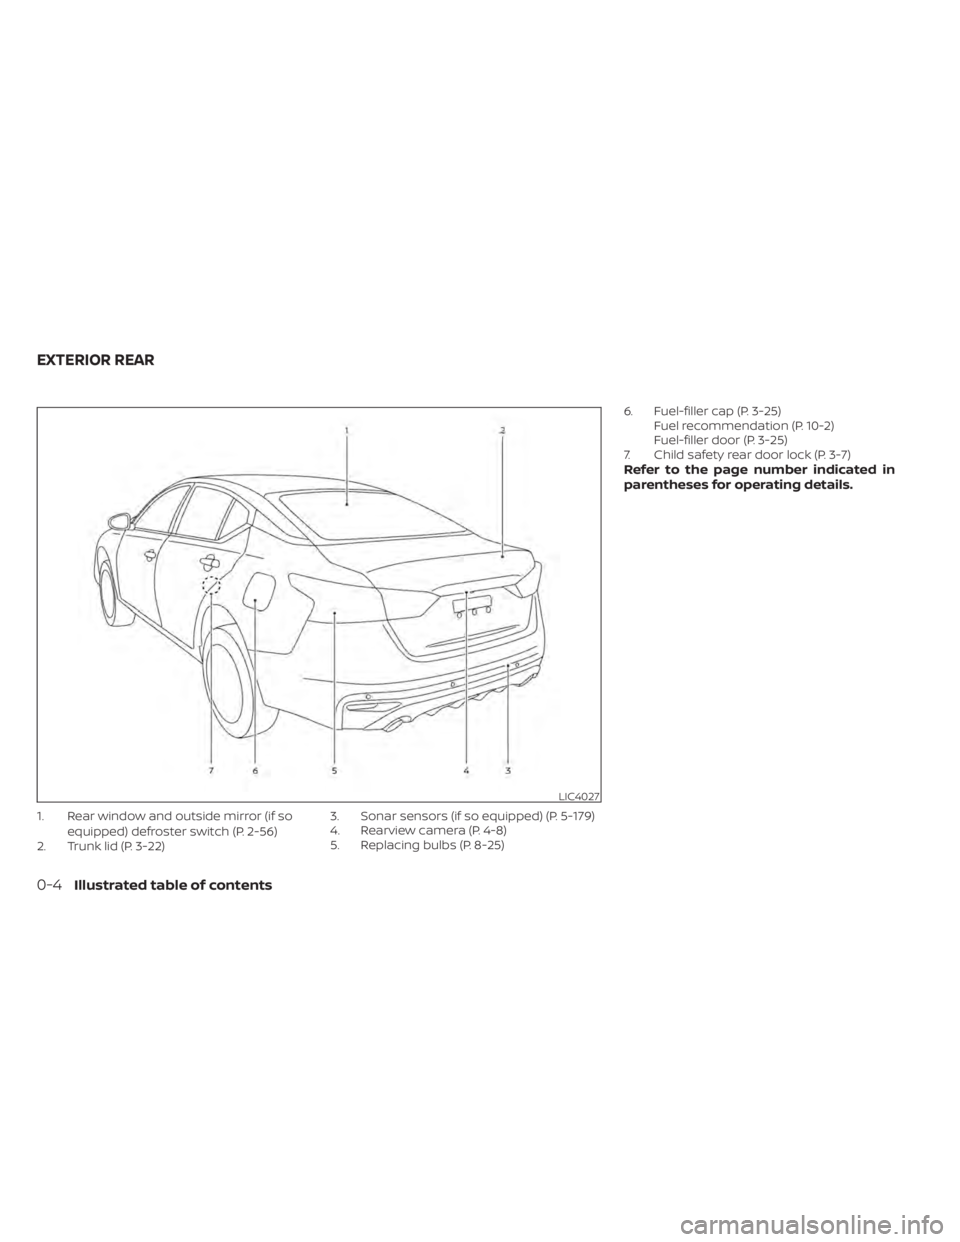 NISSAN ALTIMA 2023  Owners Manual 1. Rear window and outside mirror (if soequipped) defroster switch (P. 2-56)
2. Trunk lid (P. 3-22) 3. Sonar sensors (if so equipped) (P. 5-179)
4. Rearview camera (P. 4-8)
5. Replacing bulbs (P. 8-25